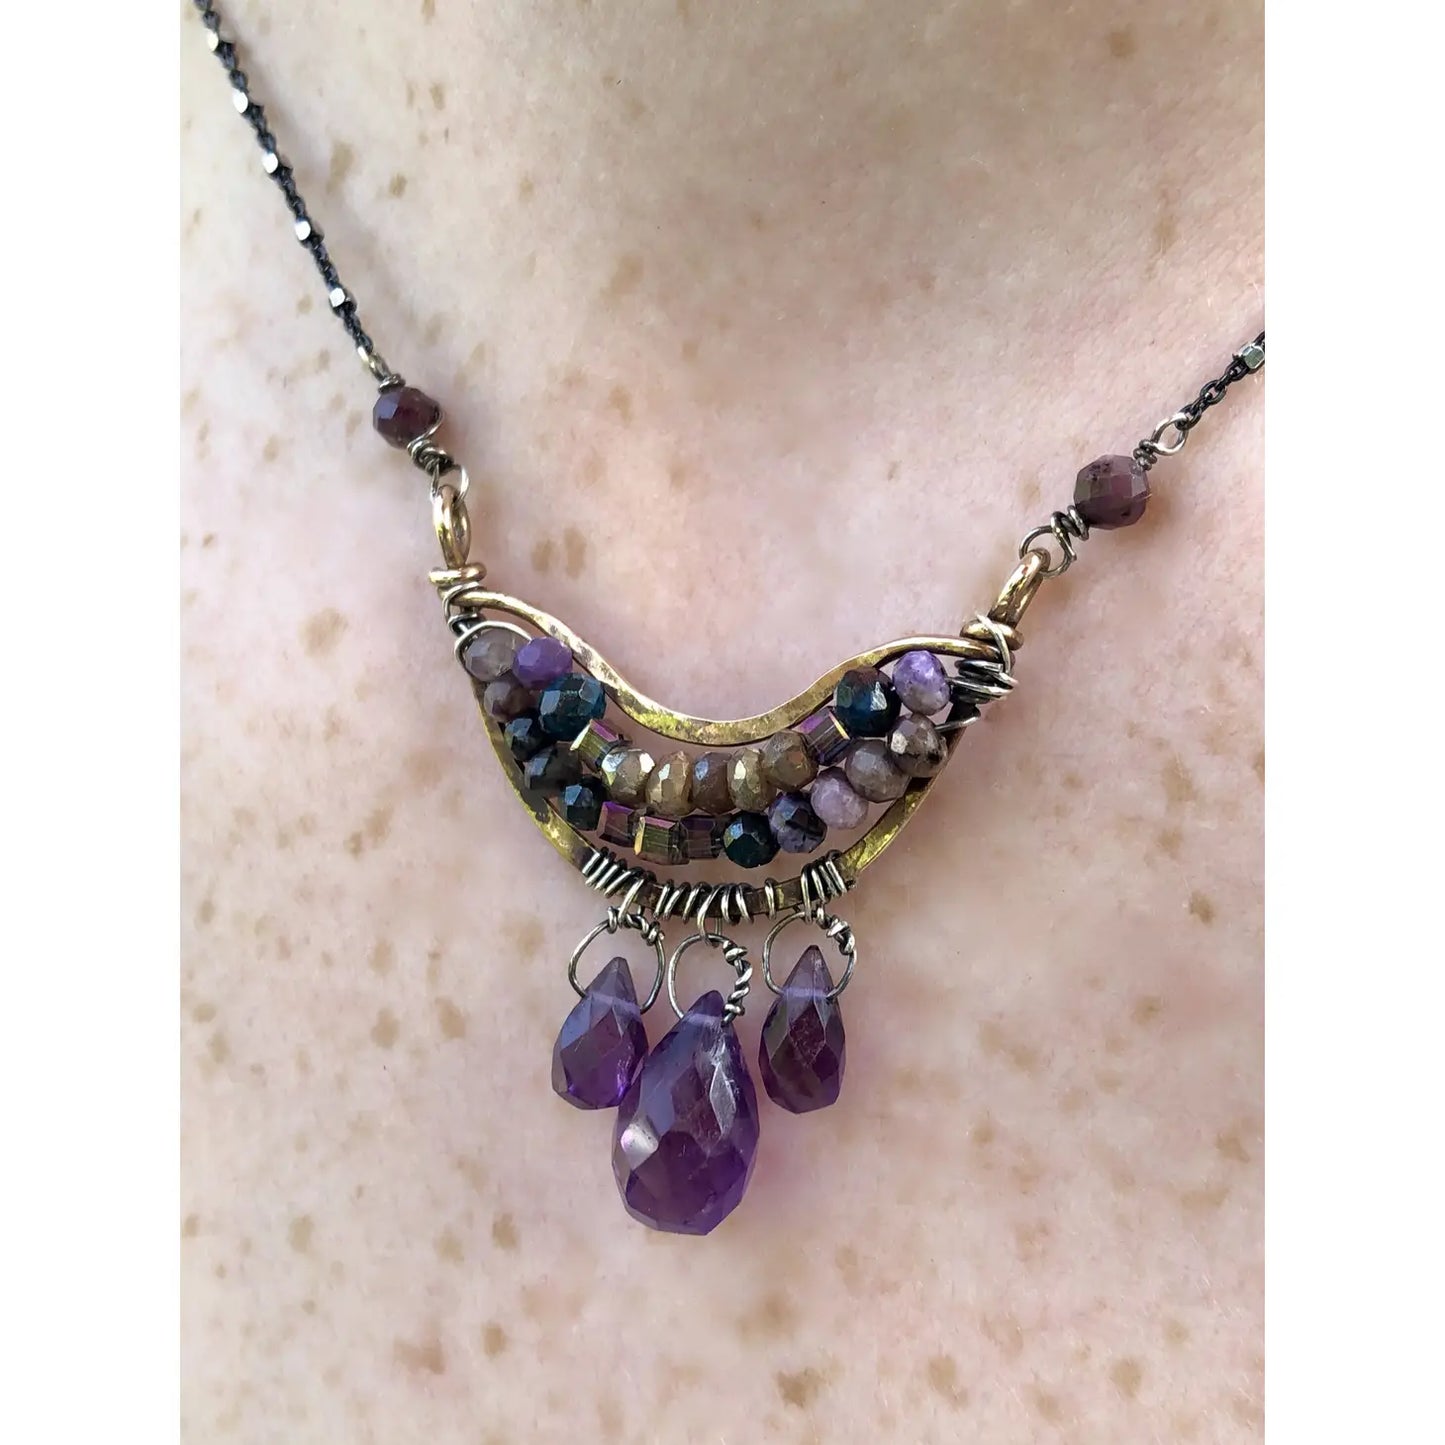 Art By Any Means Amethyst Mosaic Necklace